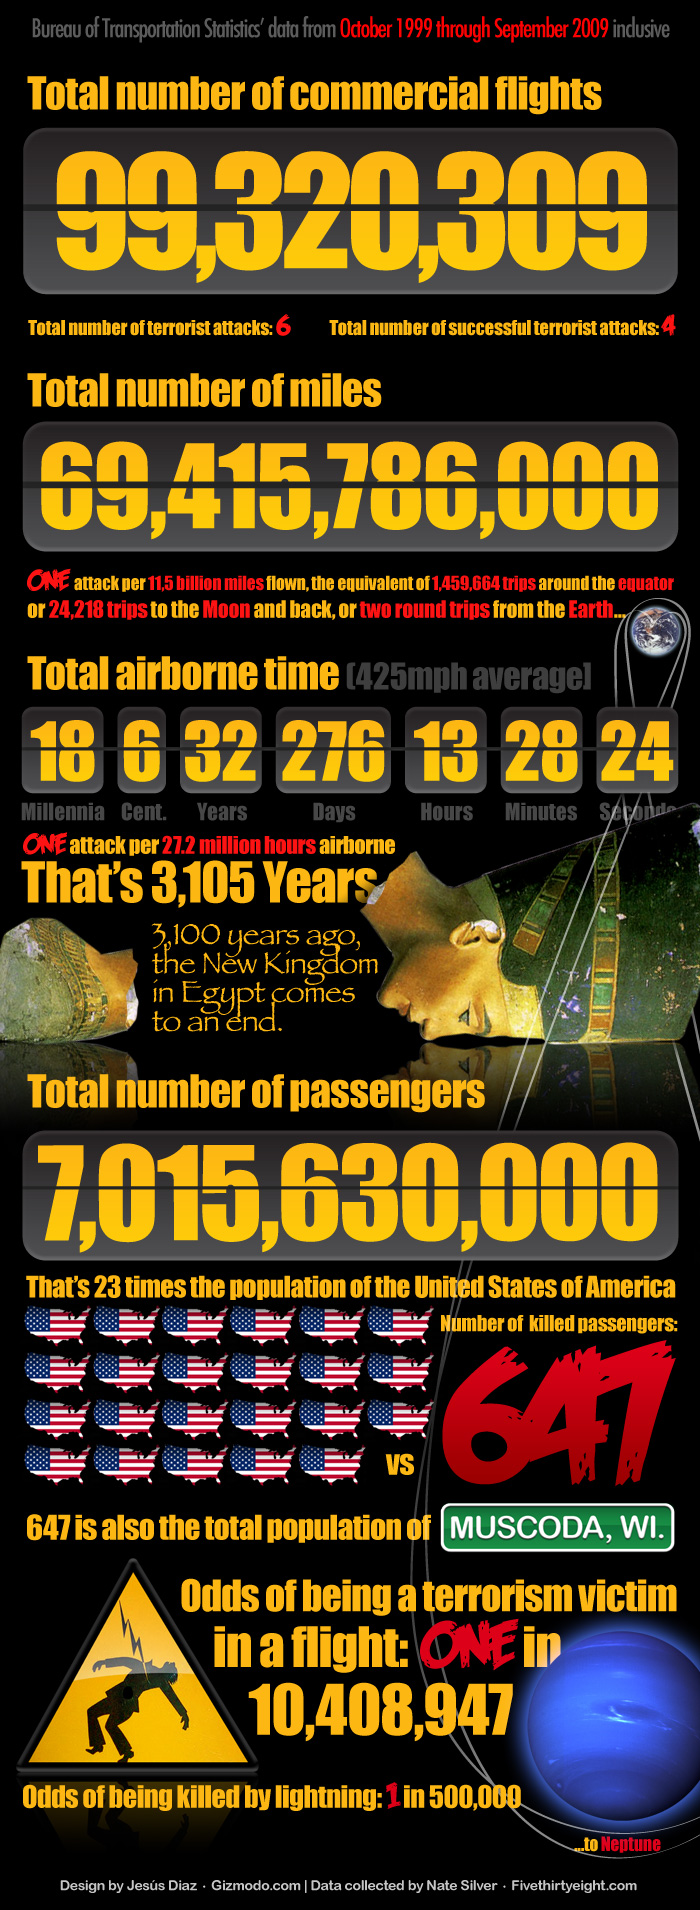 This post shows interesting facts about the number of commercial flights, their flown distance in miles and all about the flights. 